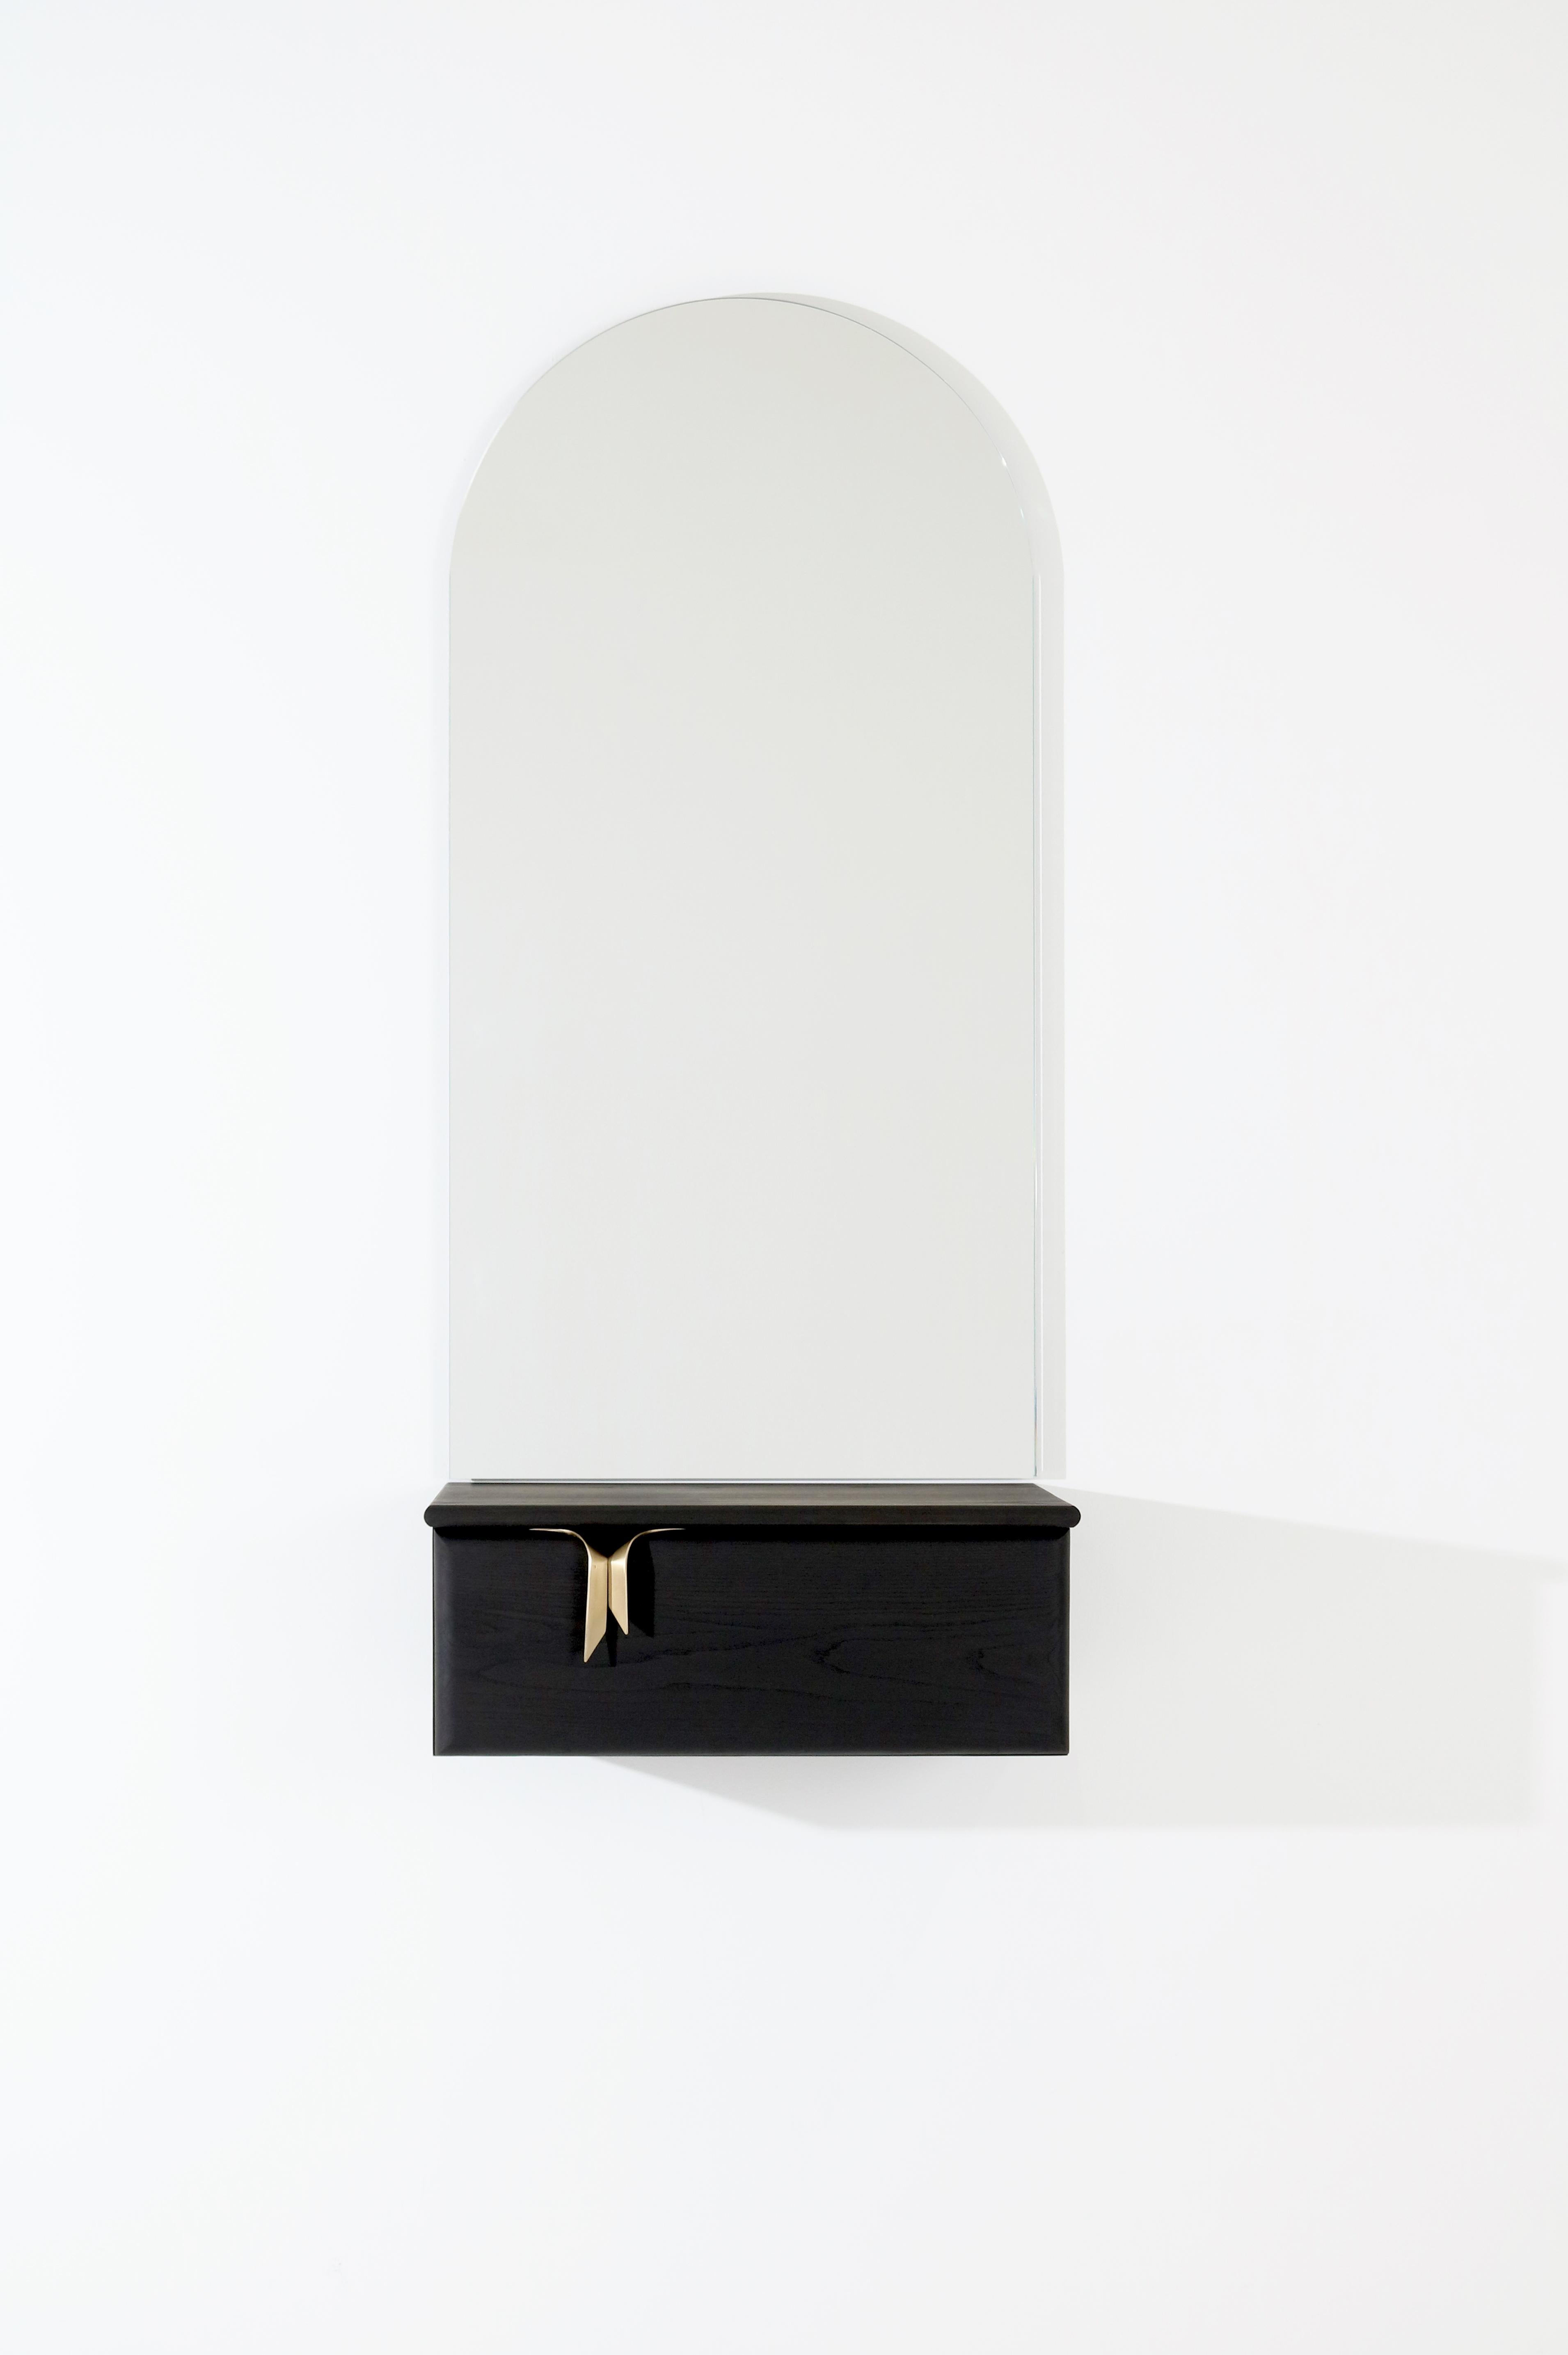 An interest in the translation of textile languages and soft surfaces through furniture forms has led to the development of a unique hardware and storage collection. Inspired by ribbons and communicated through hand cast solid bronze hardware and